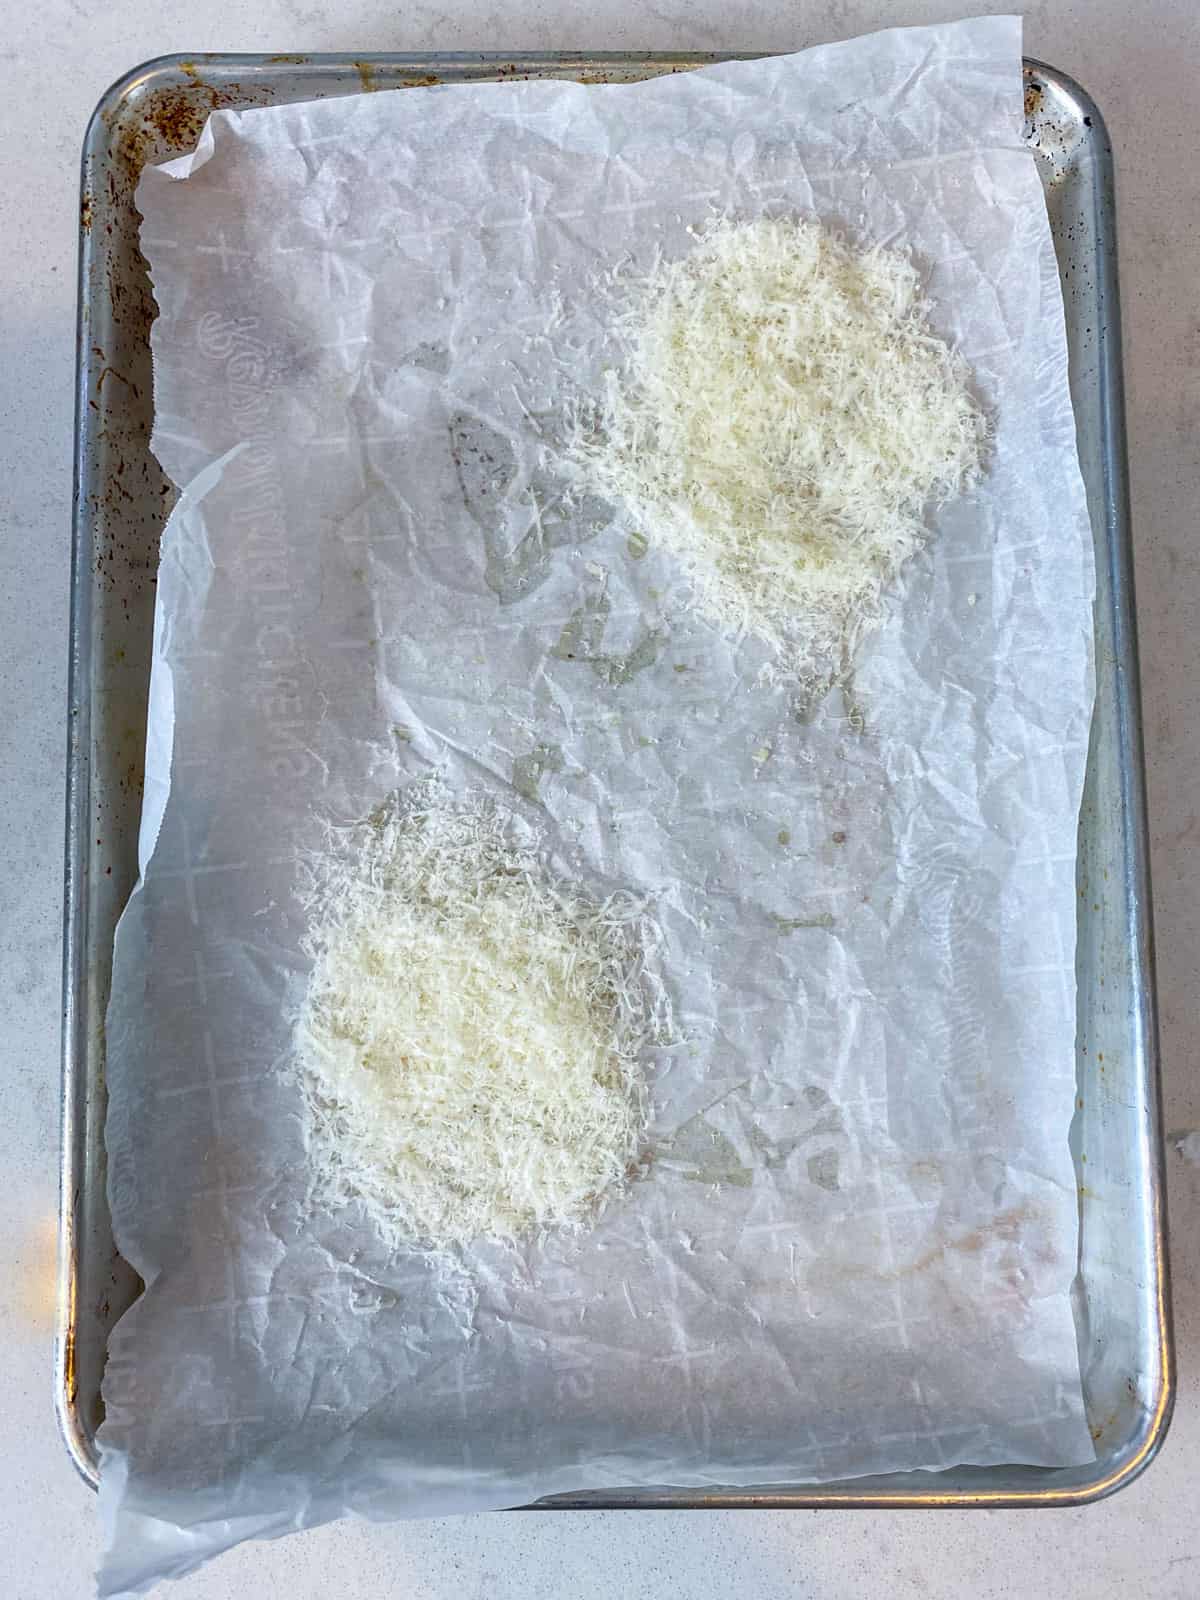 Form the grated Parmesan into a uniform circle on a lined baking sheet.